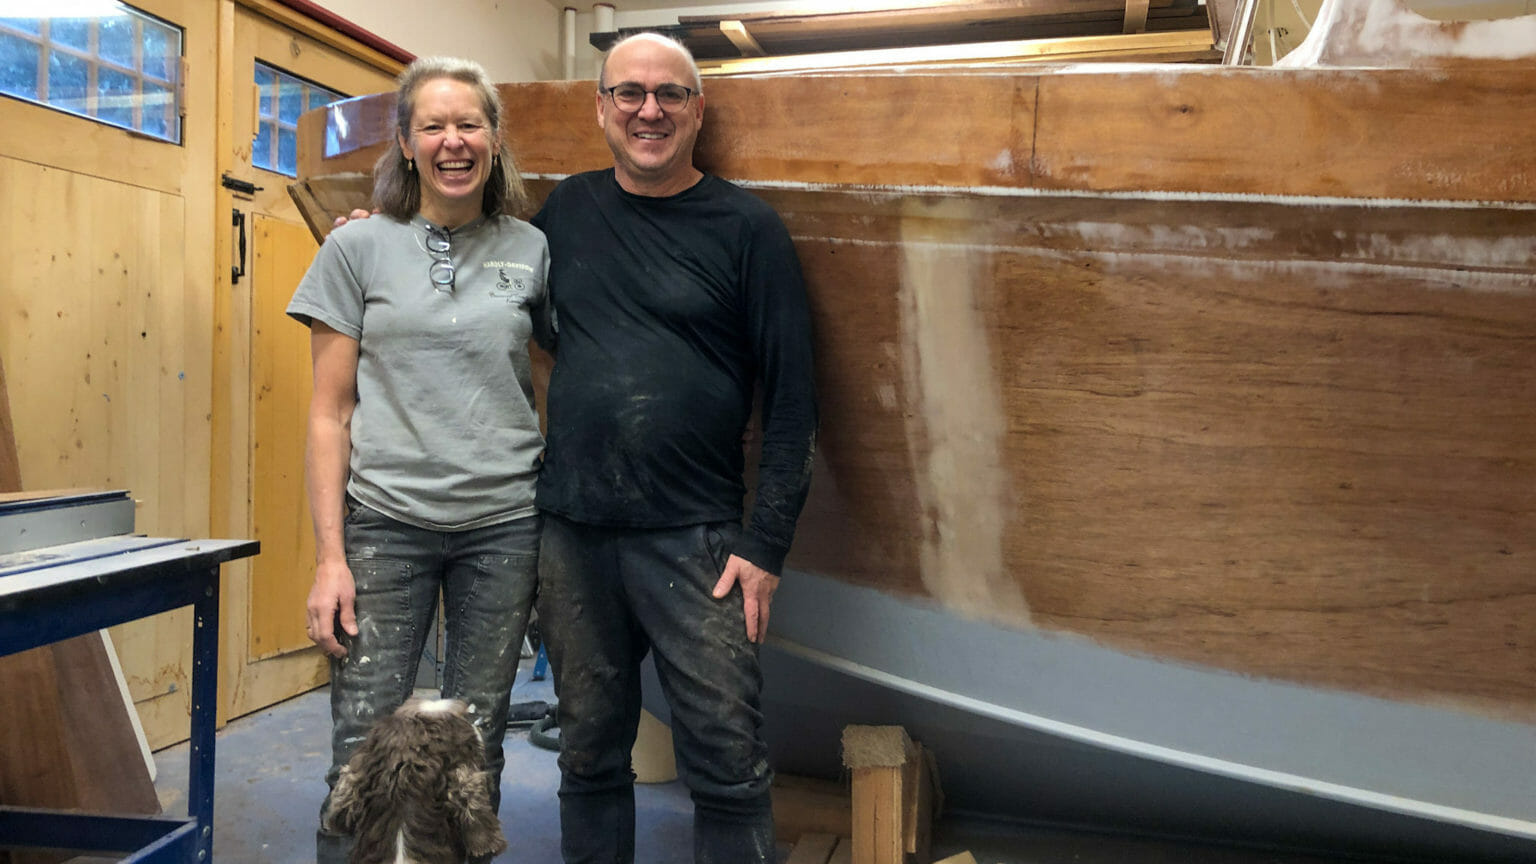 Woodworker couple builds tiny boat for first child born in Juneau each year